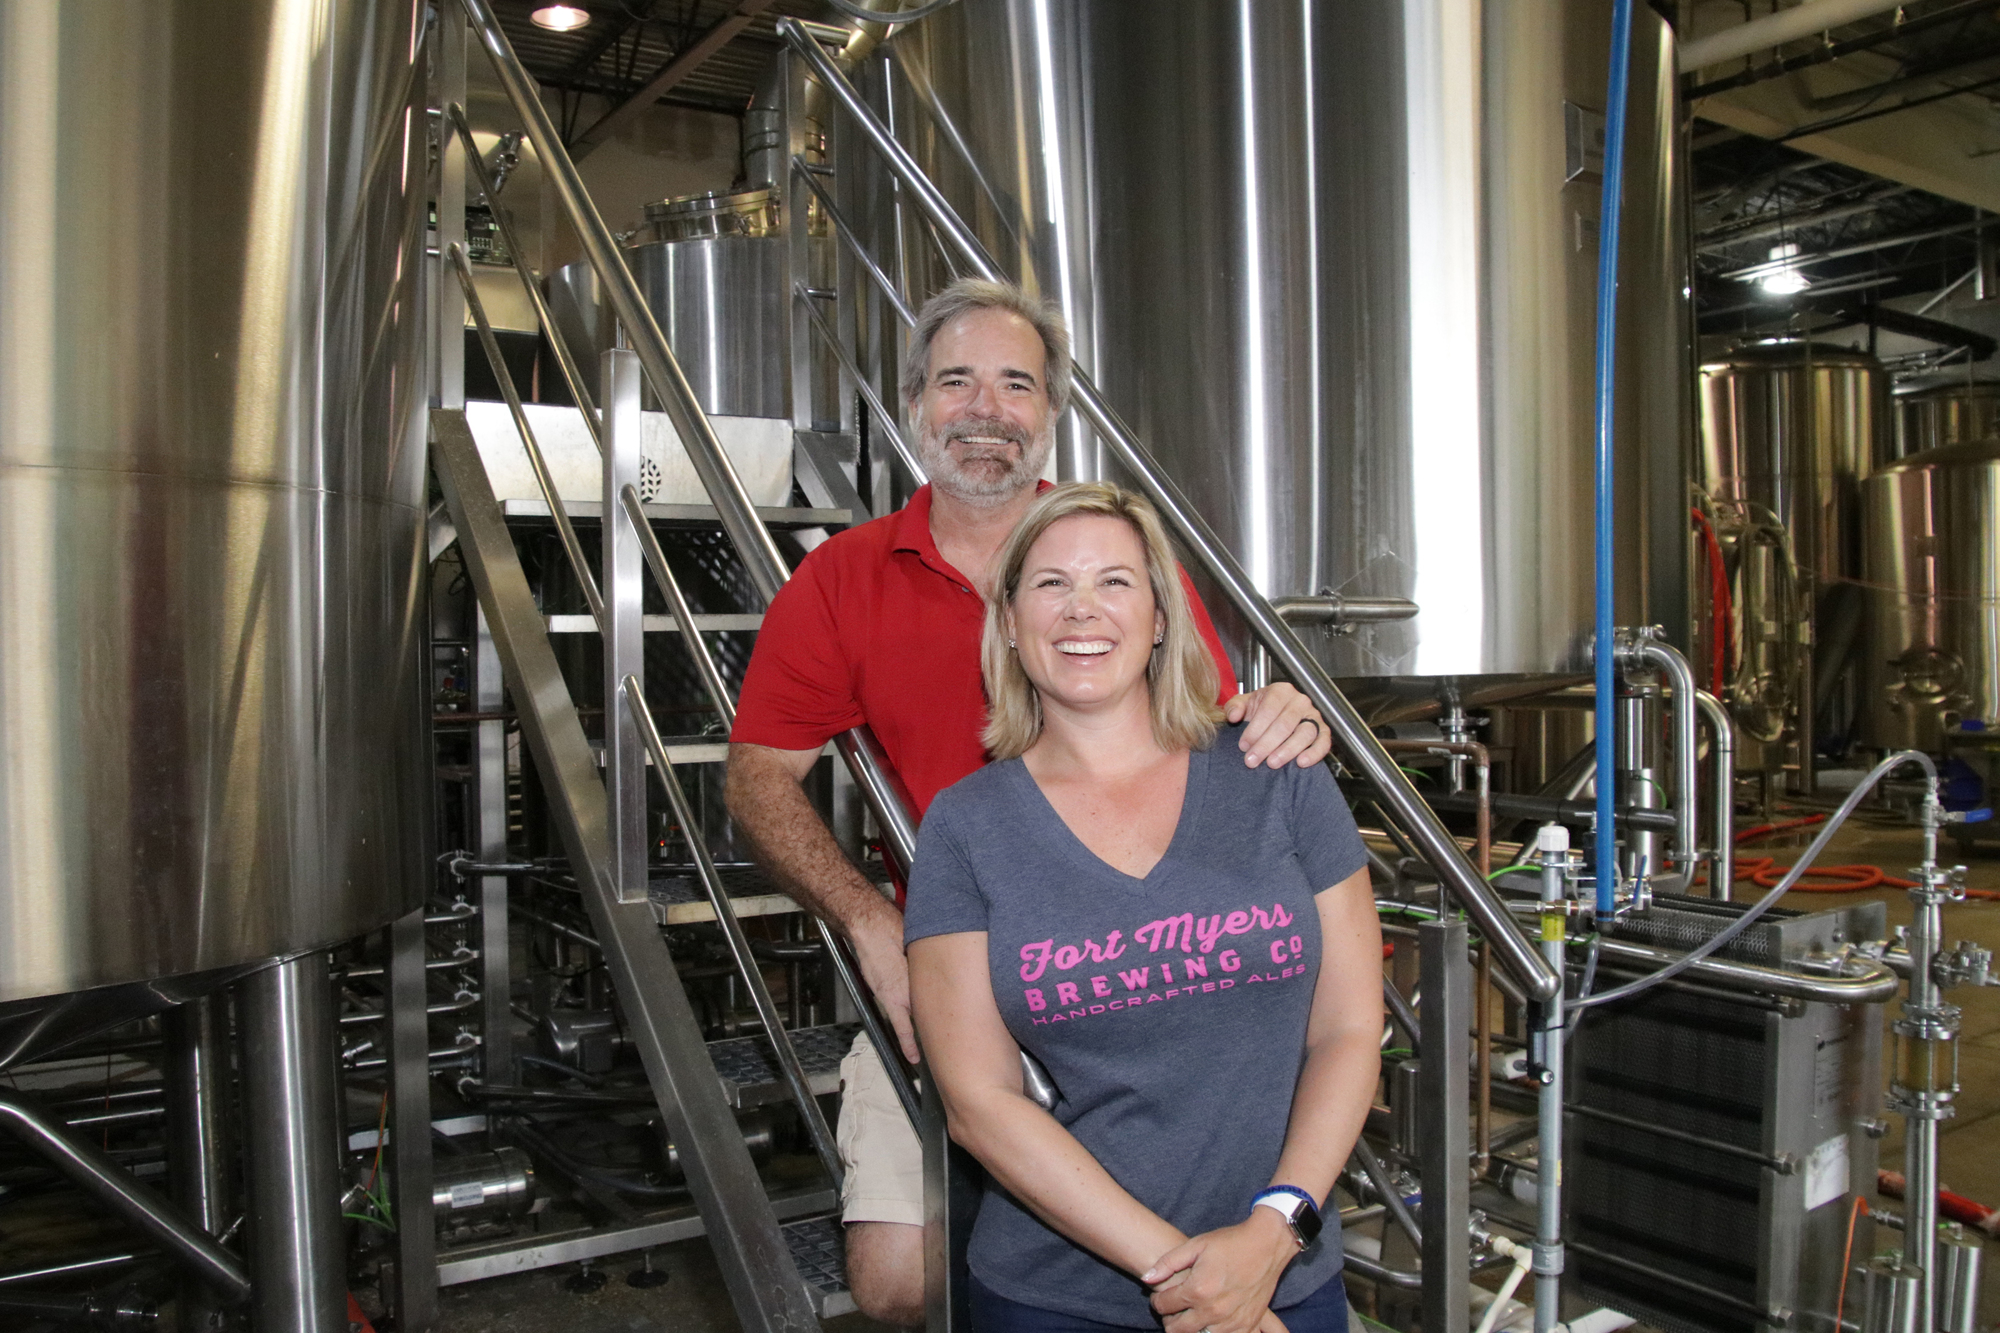 File. Fort Myers Brewing Co. was the first brewery and taproom in Southwest Florida, when it opened in 2013.